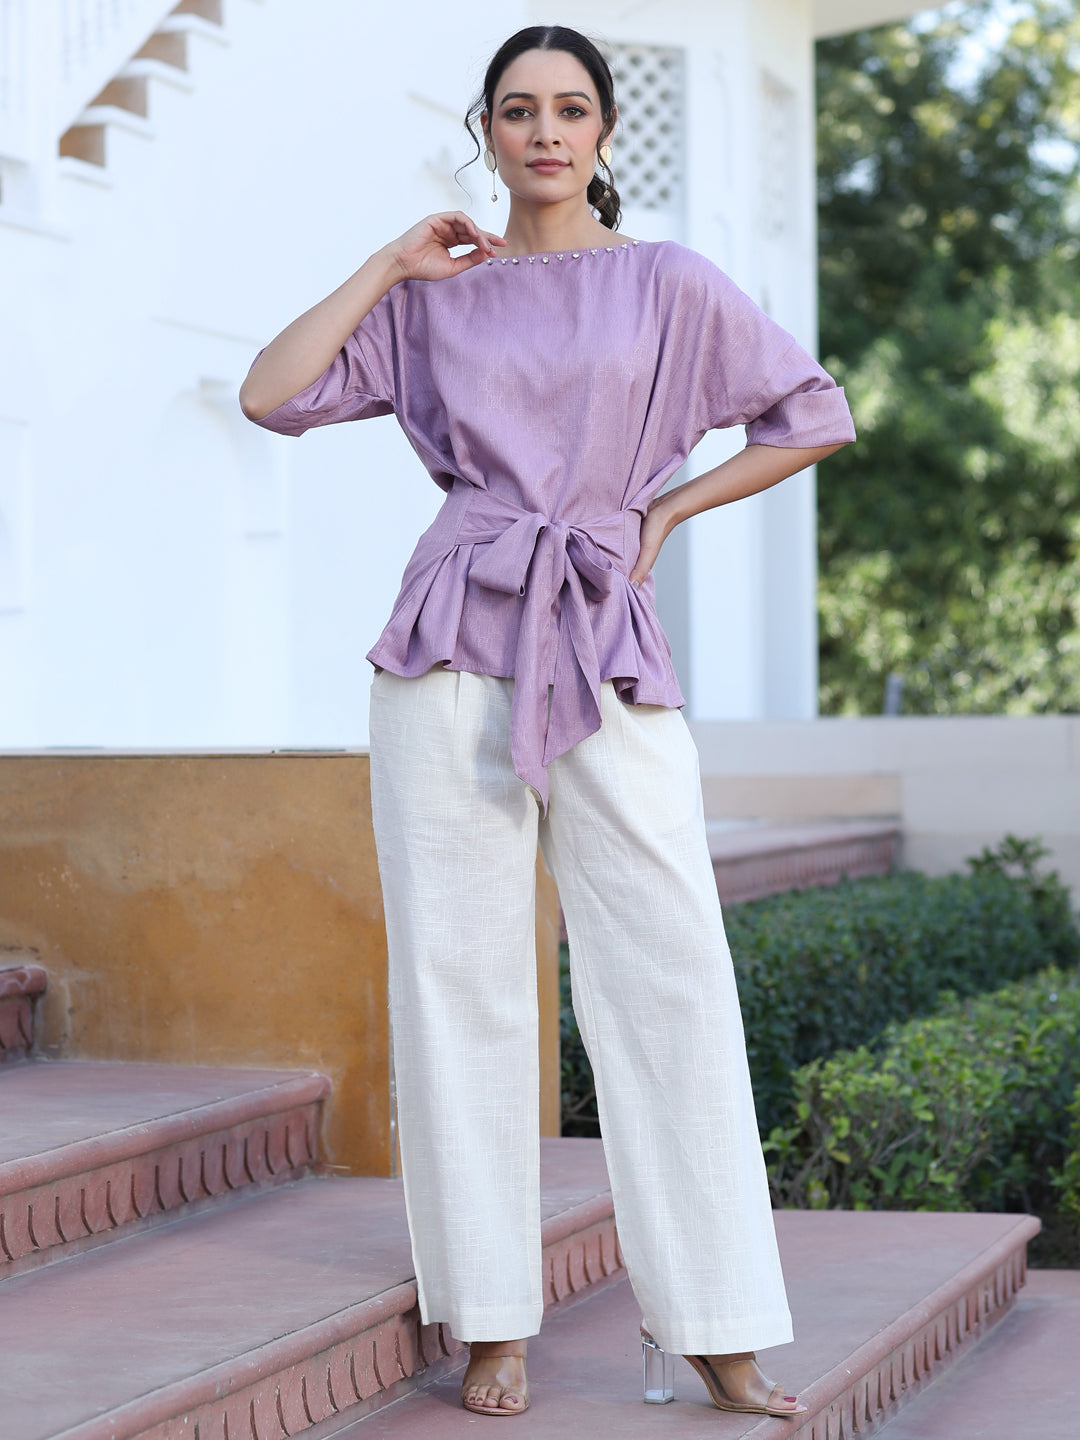 A Mauve Color Self Weaved Embellished Top With Tie-Up At The Waist And Extended Sleeves Top With Cotton Off-White Flared Pants